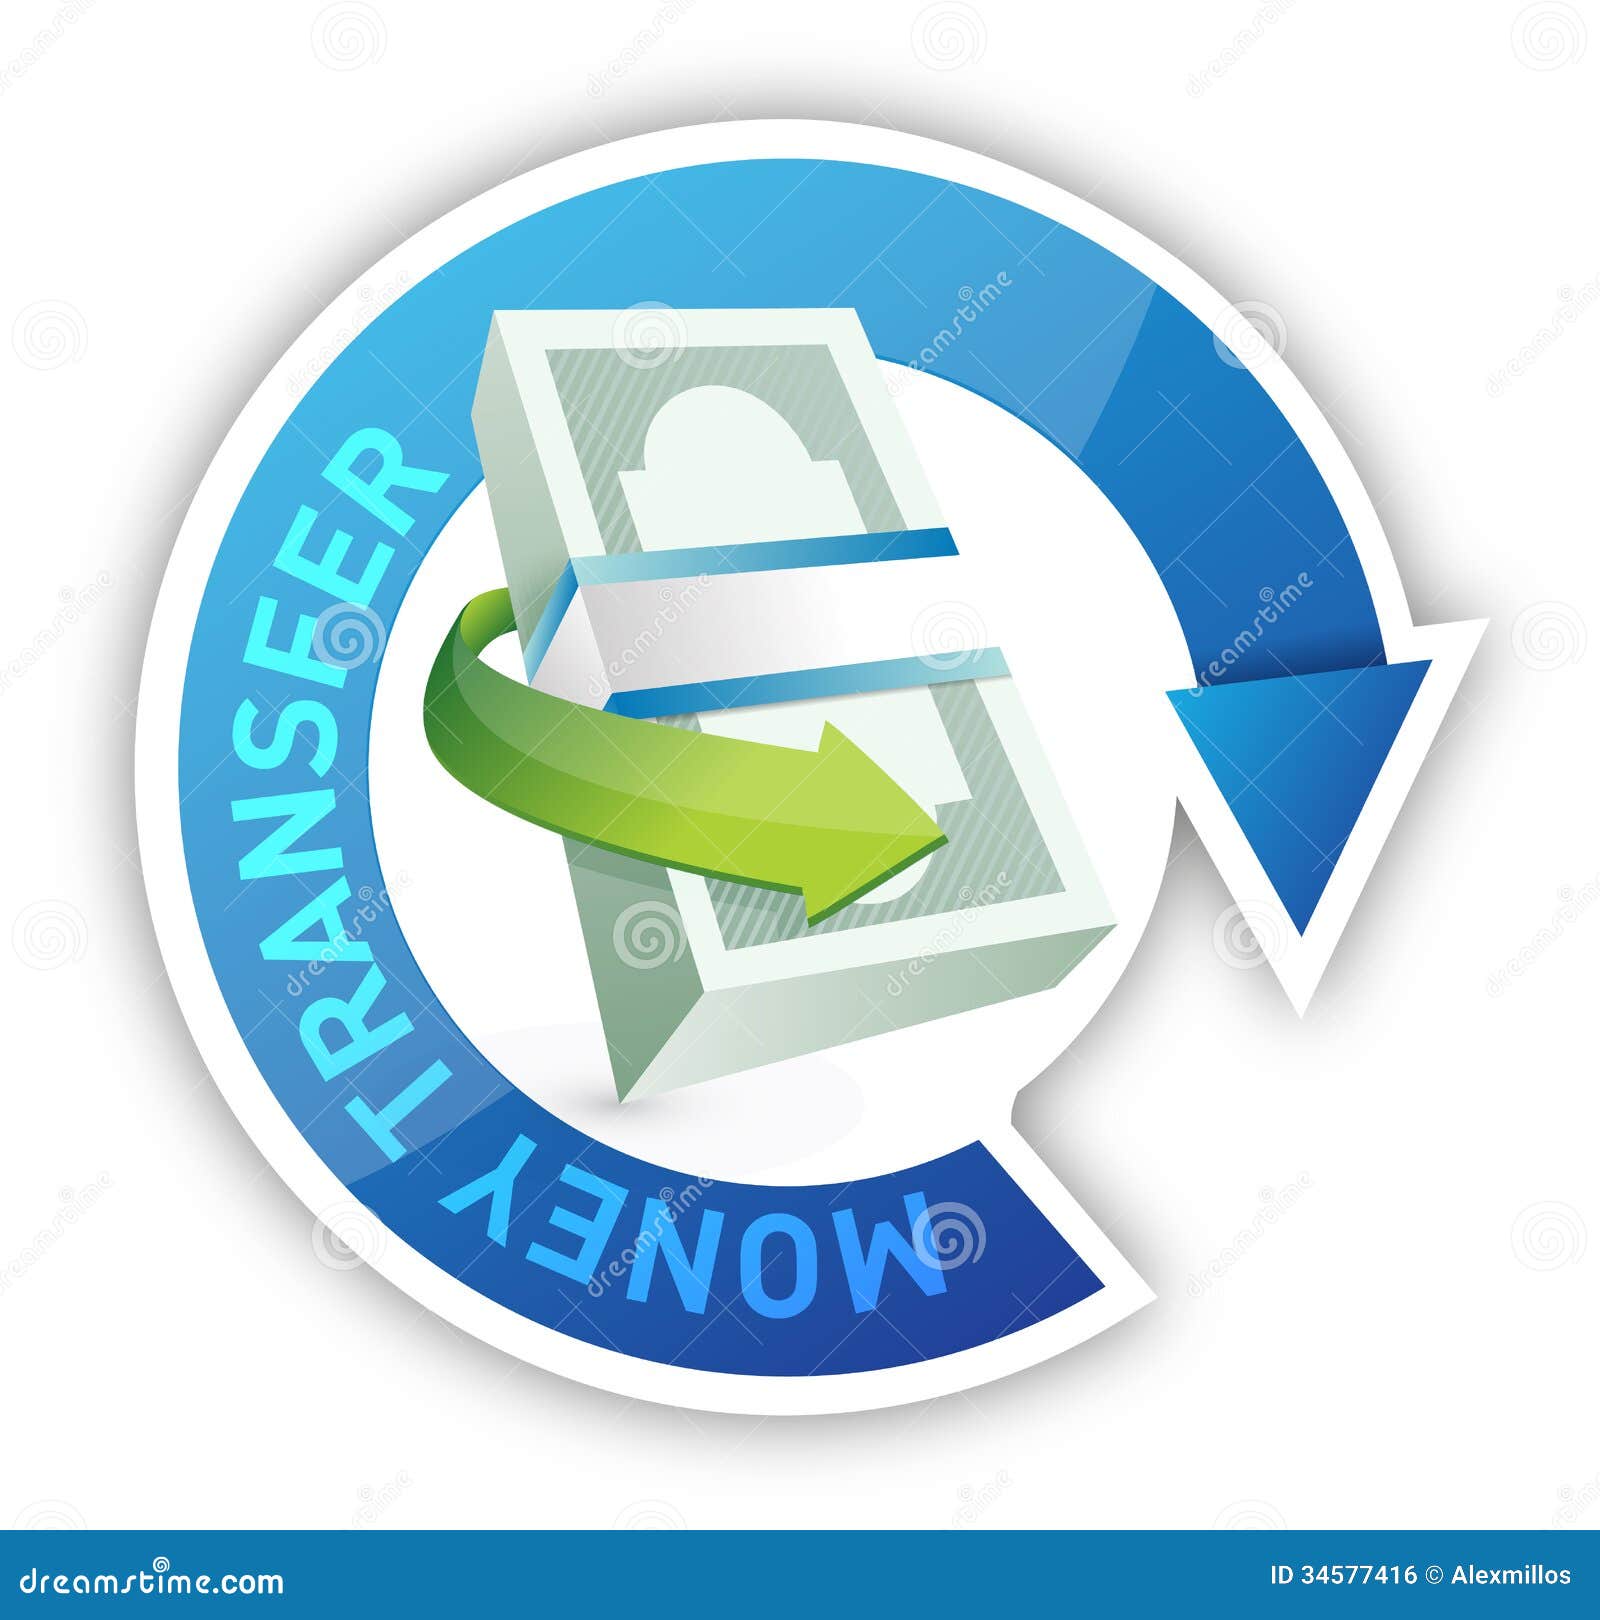 moving money clipart - photo #7